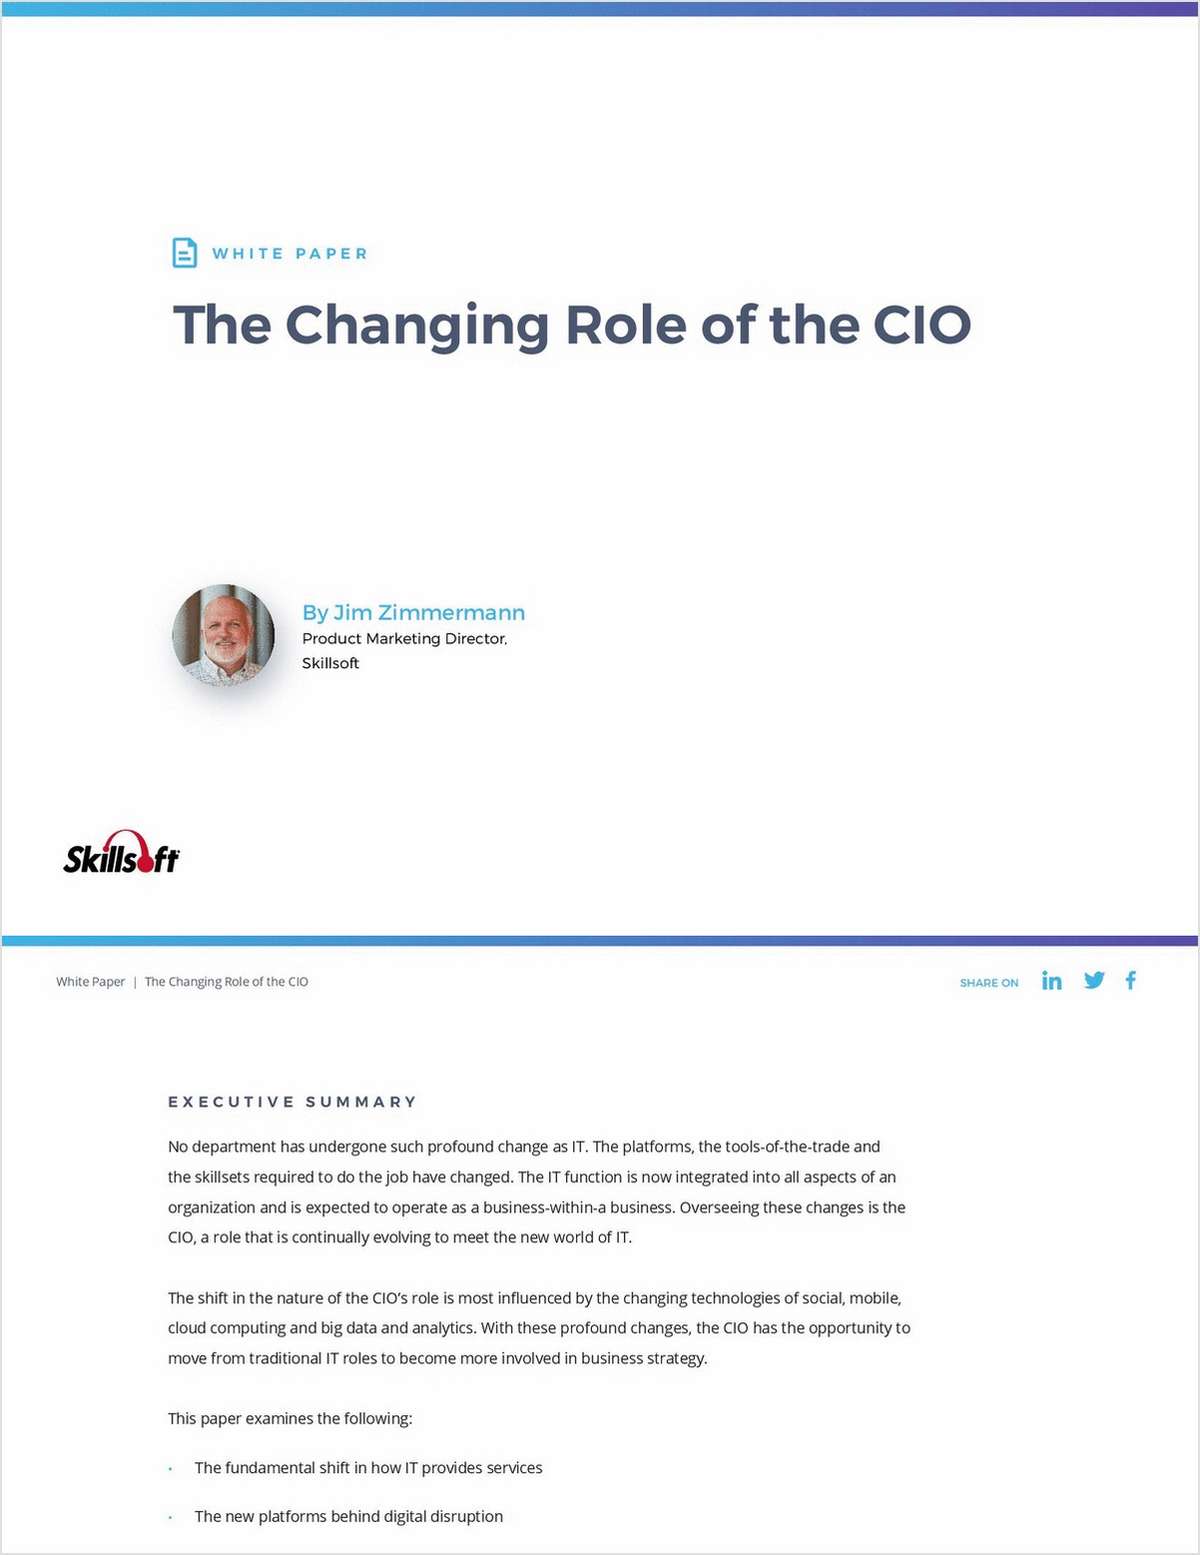 The Changing Role of the CIO